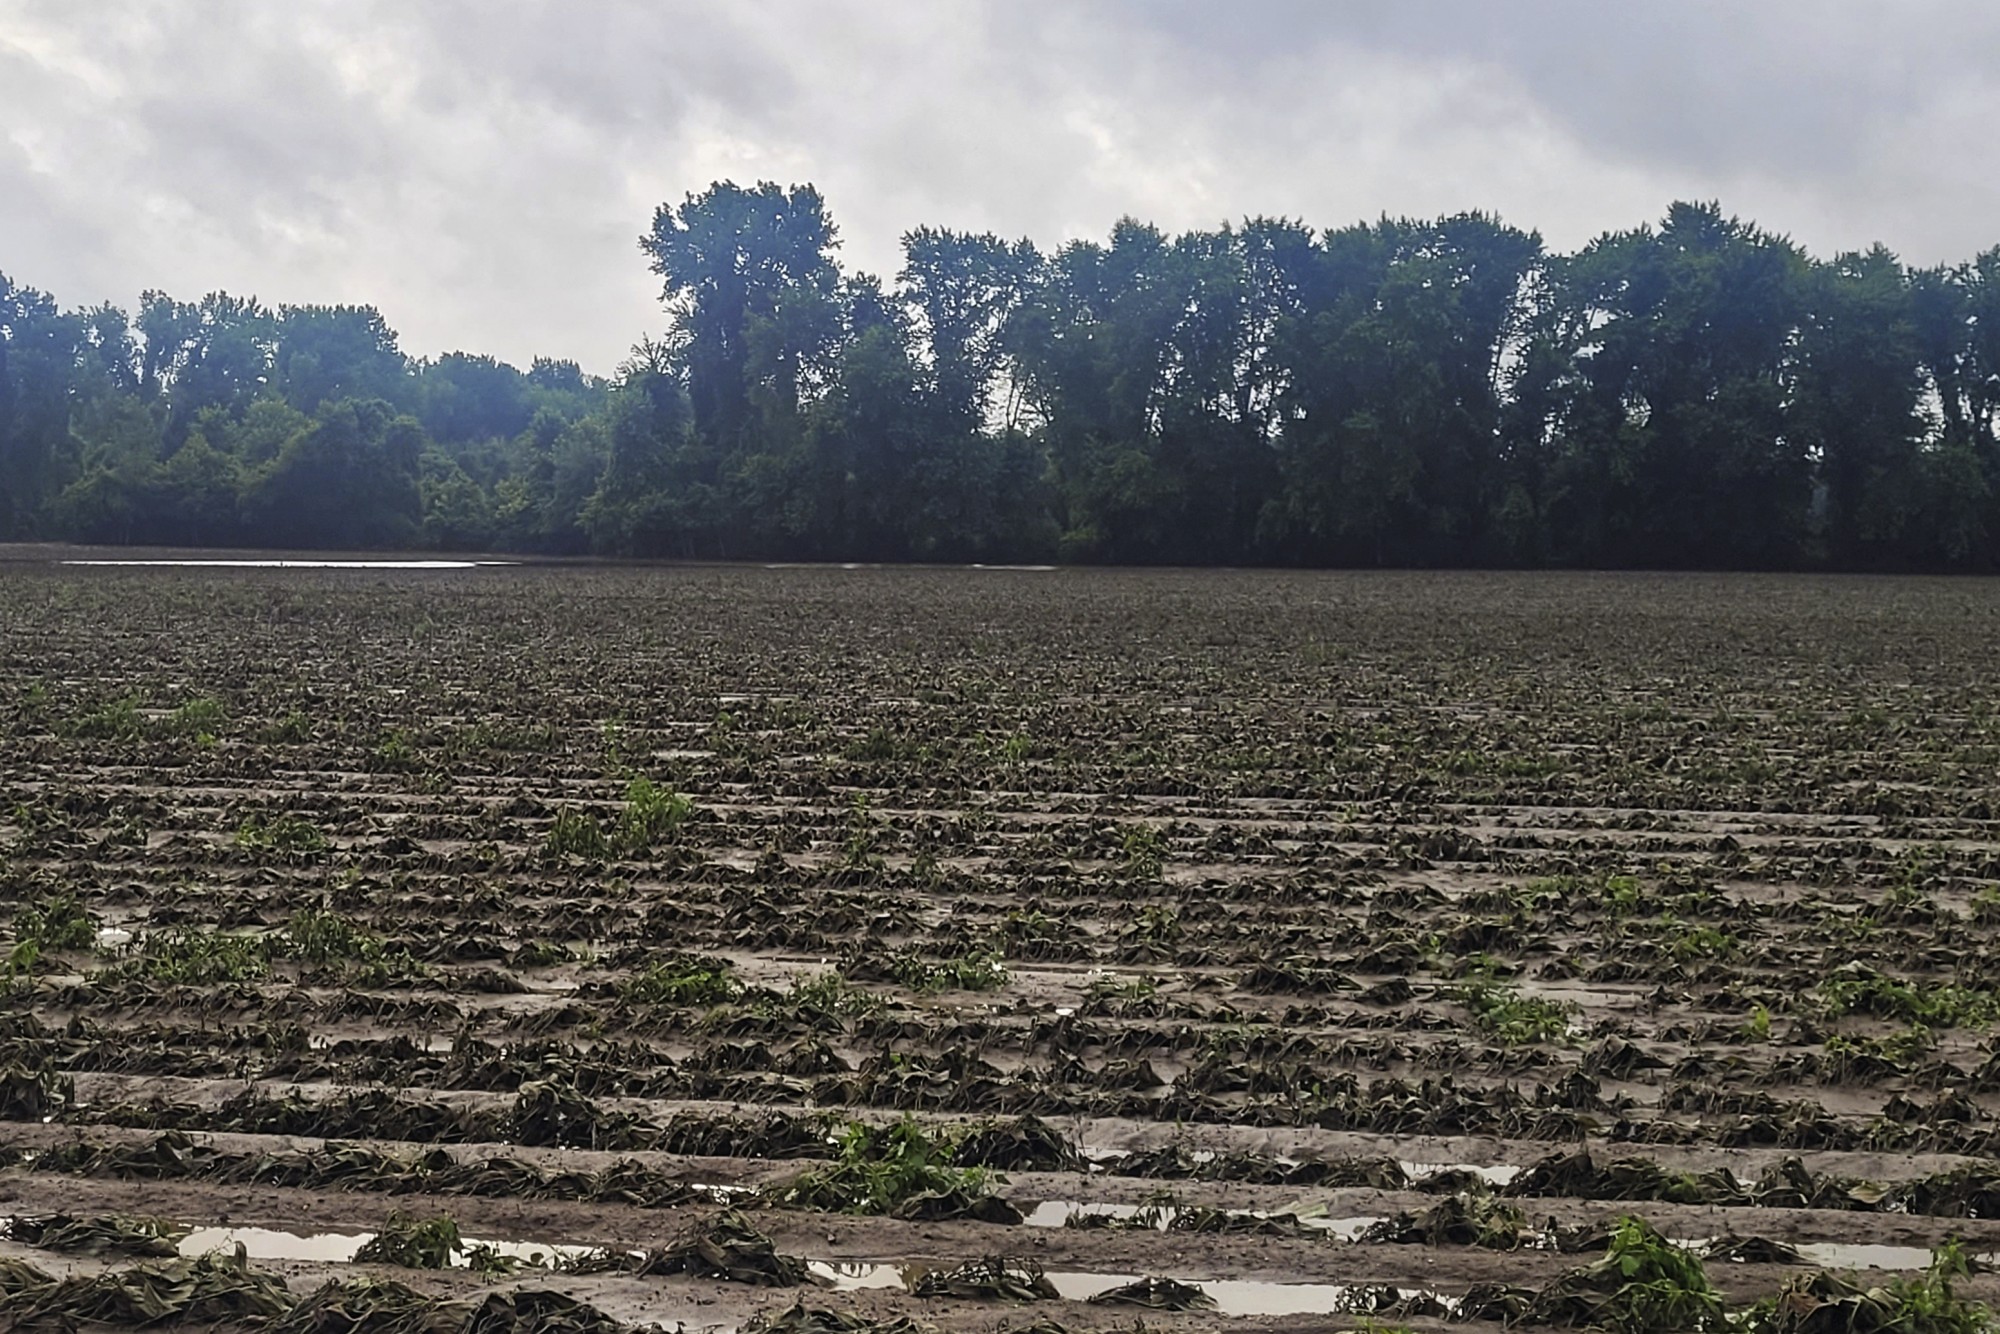 Northeast floods devastate farmers as months of labor, crops swept away